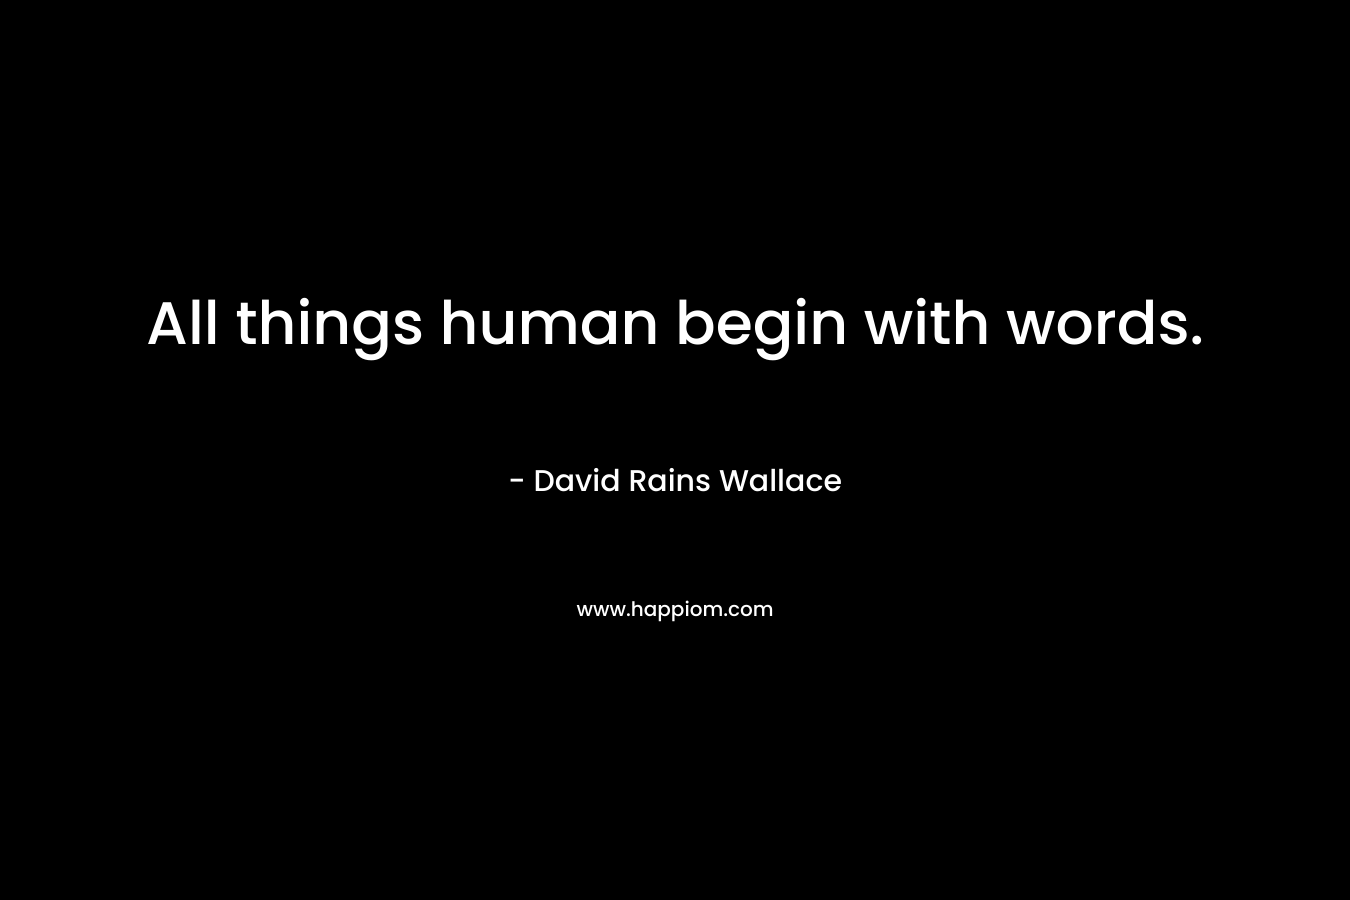 All things human begin with words.